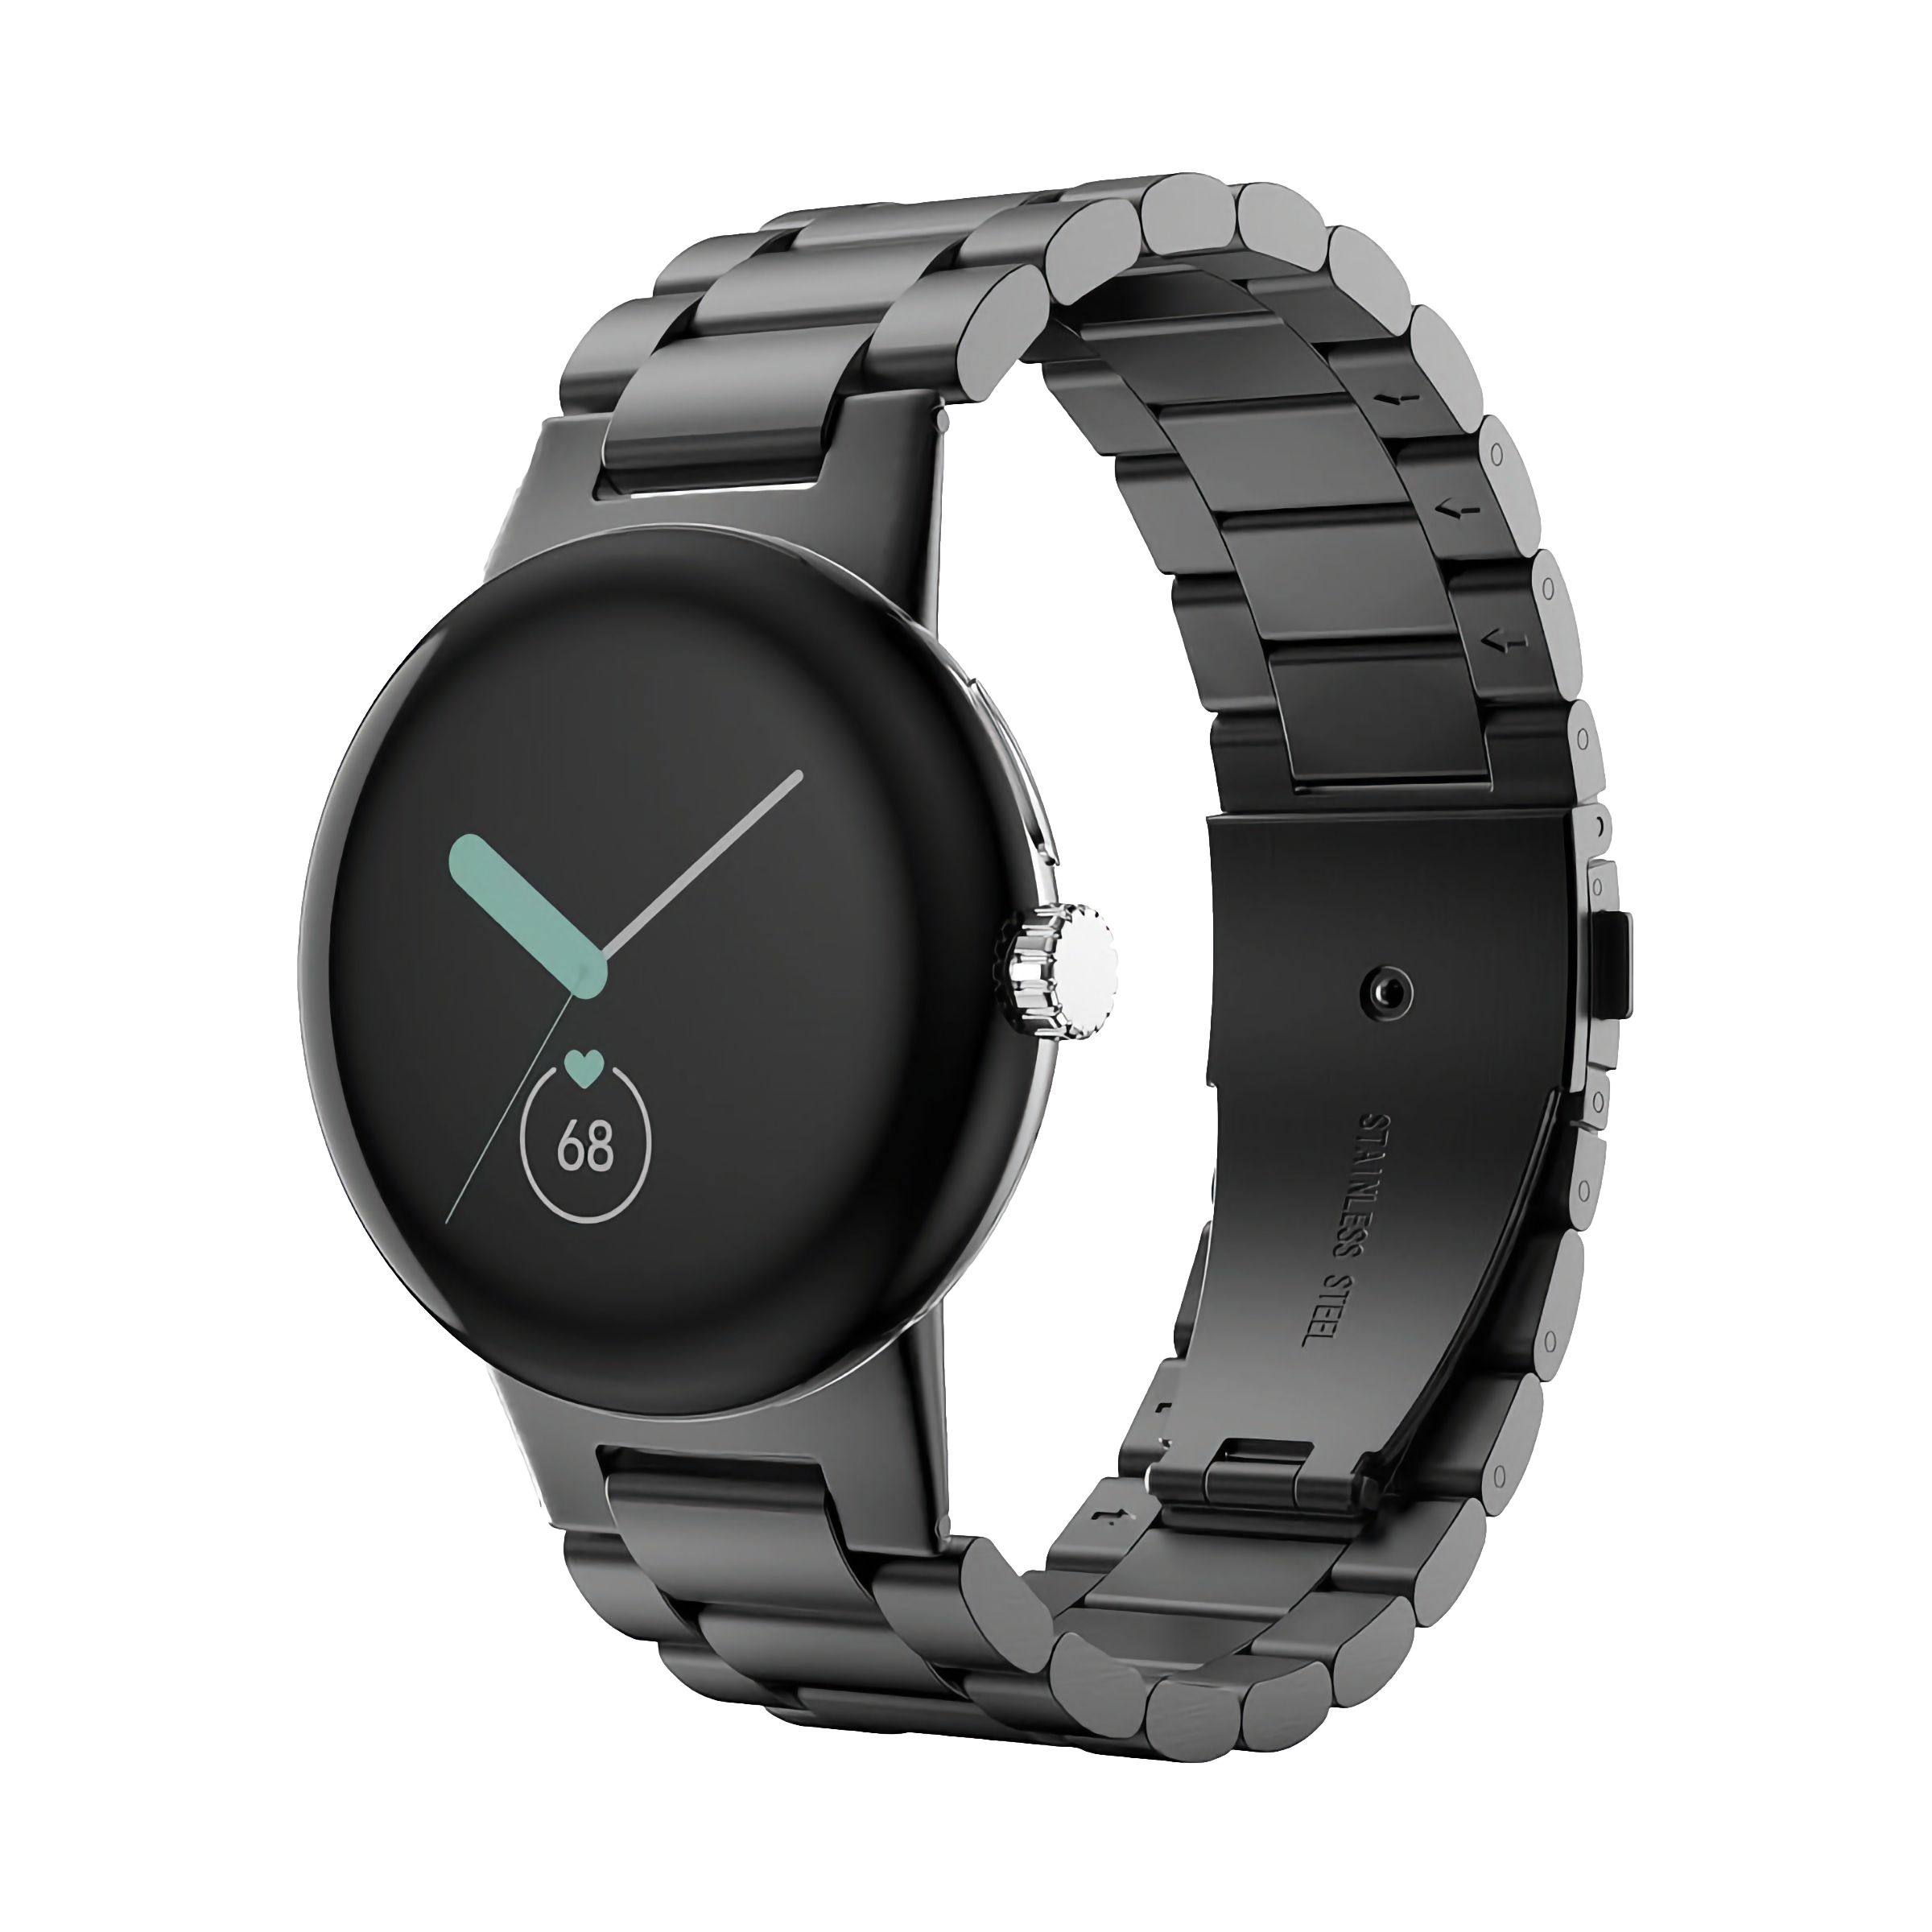 A dark grey metal band attached to a round smartwatch.